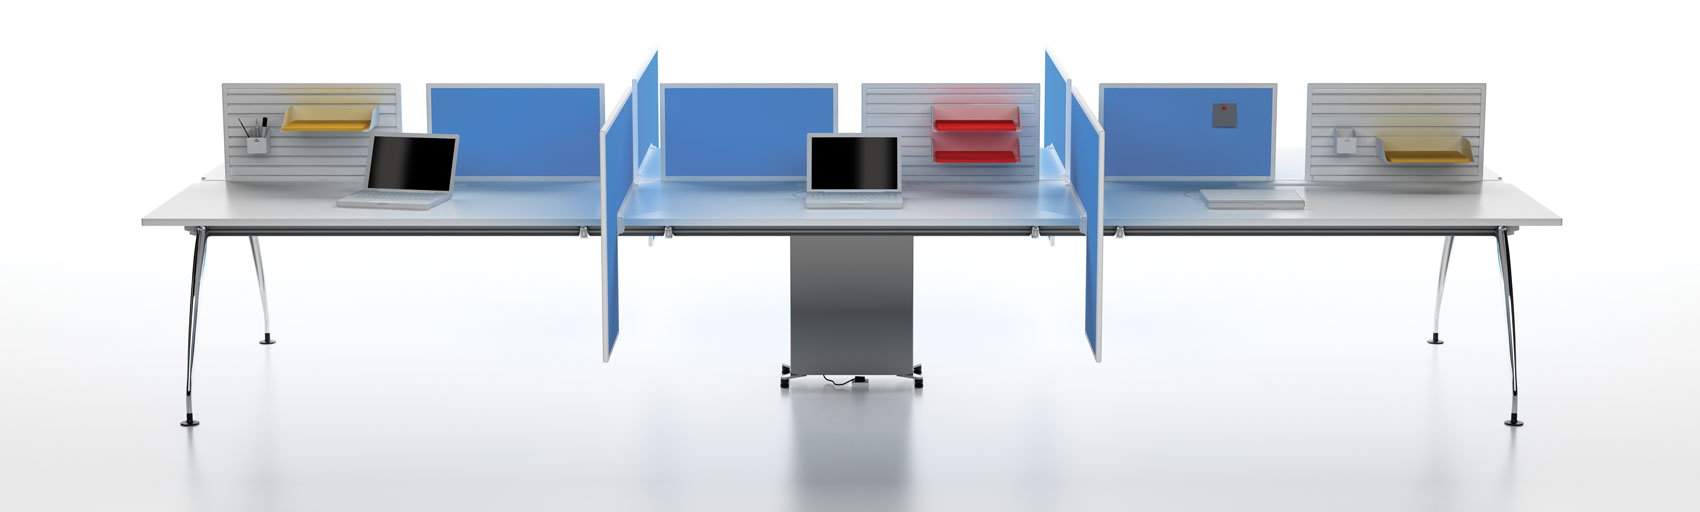 como table workstation for 6 persons